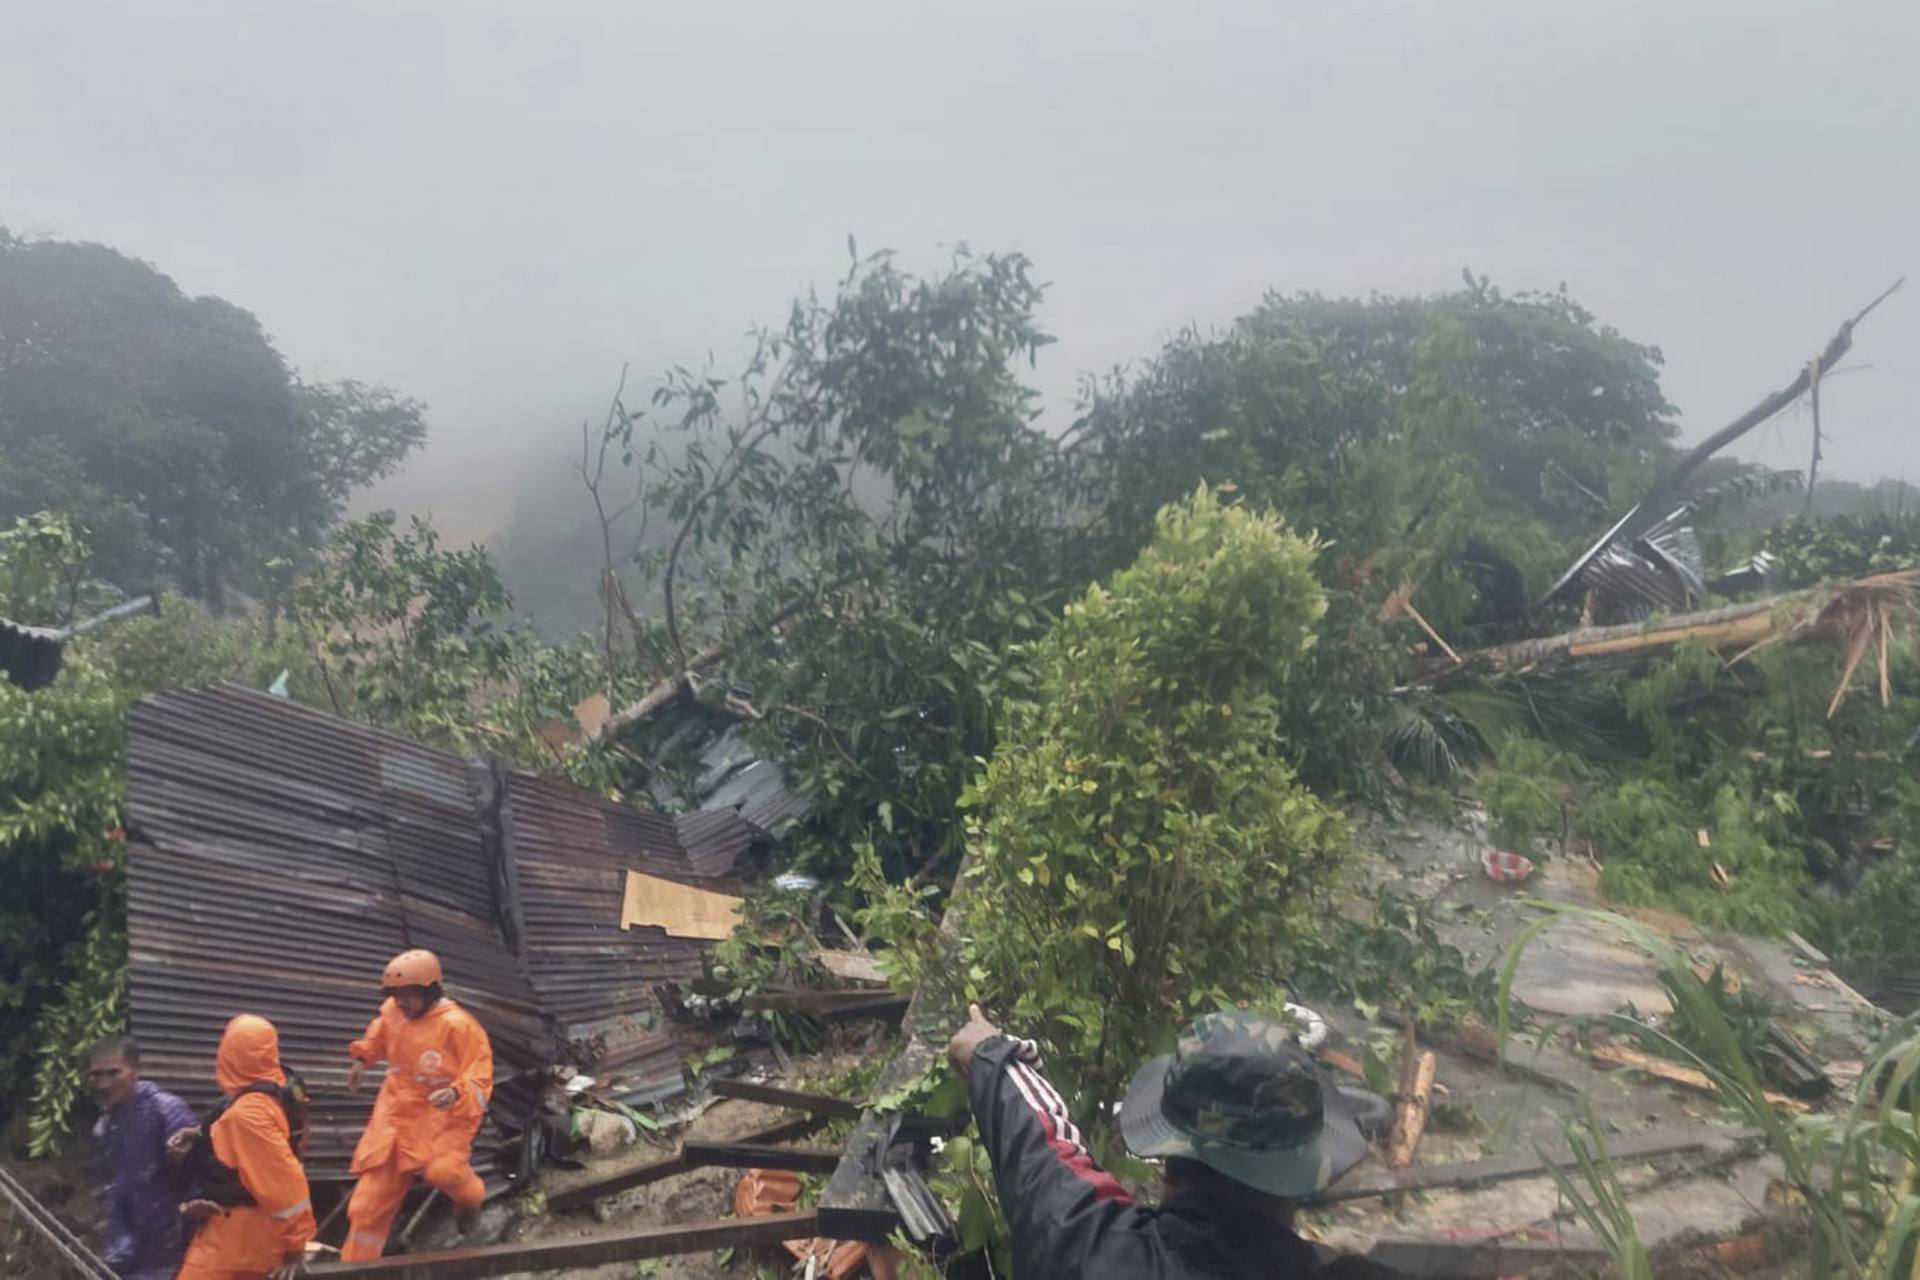 Rrescuers search for victims at the site where a landslide hit a village on Serasan Island, Natuna regency.